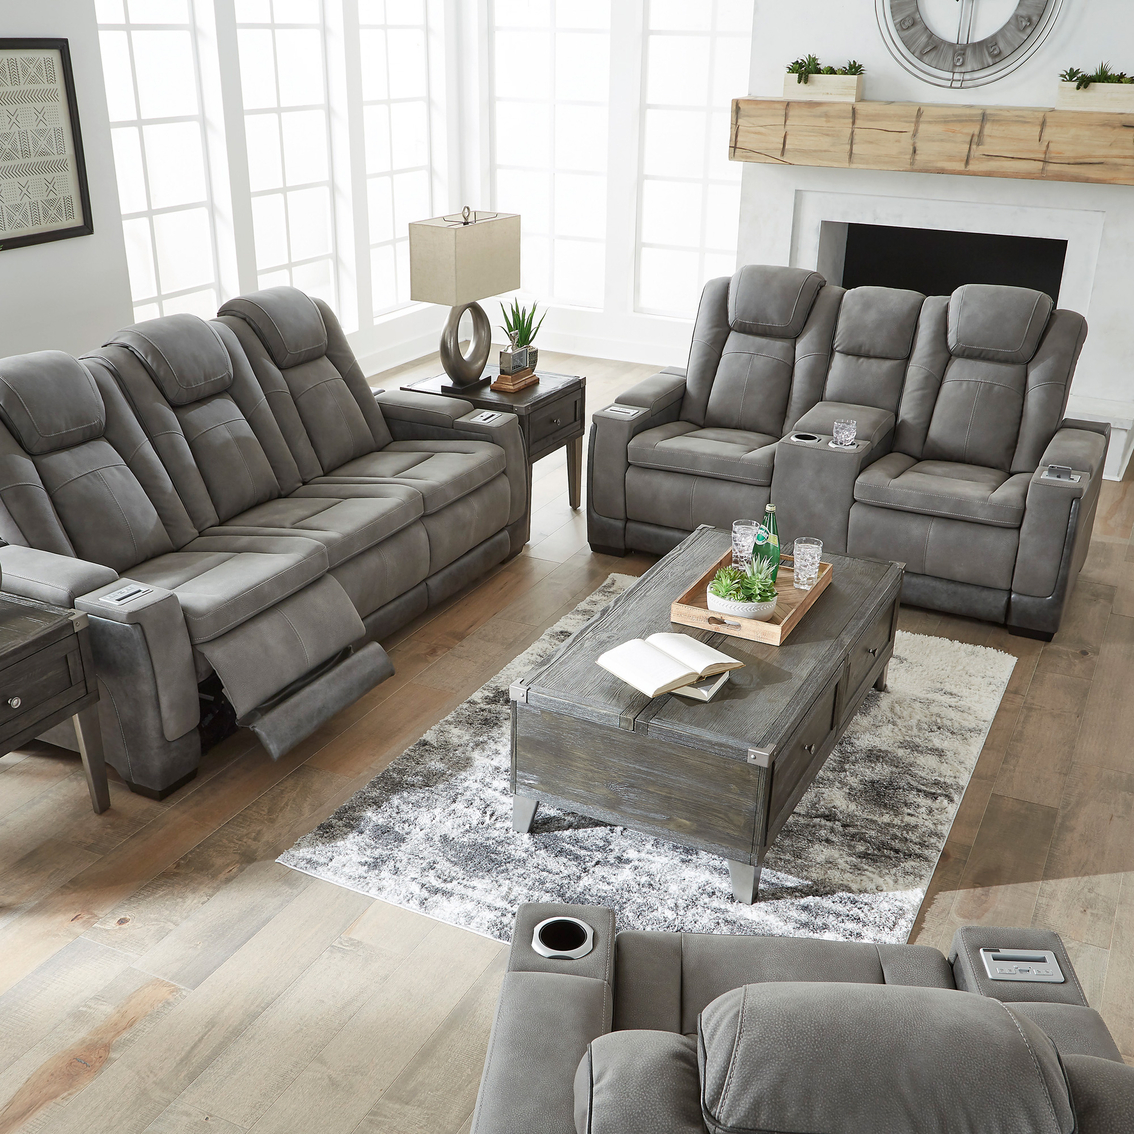 Signature Design by Ashley Next Gen DuraPella Power Reclining Loveseat with Console - Image 6 of 10